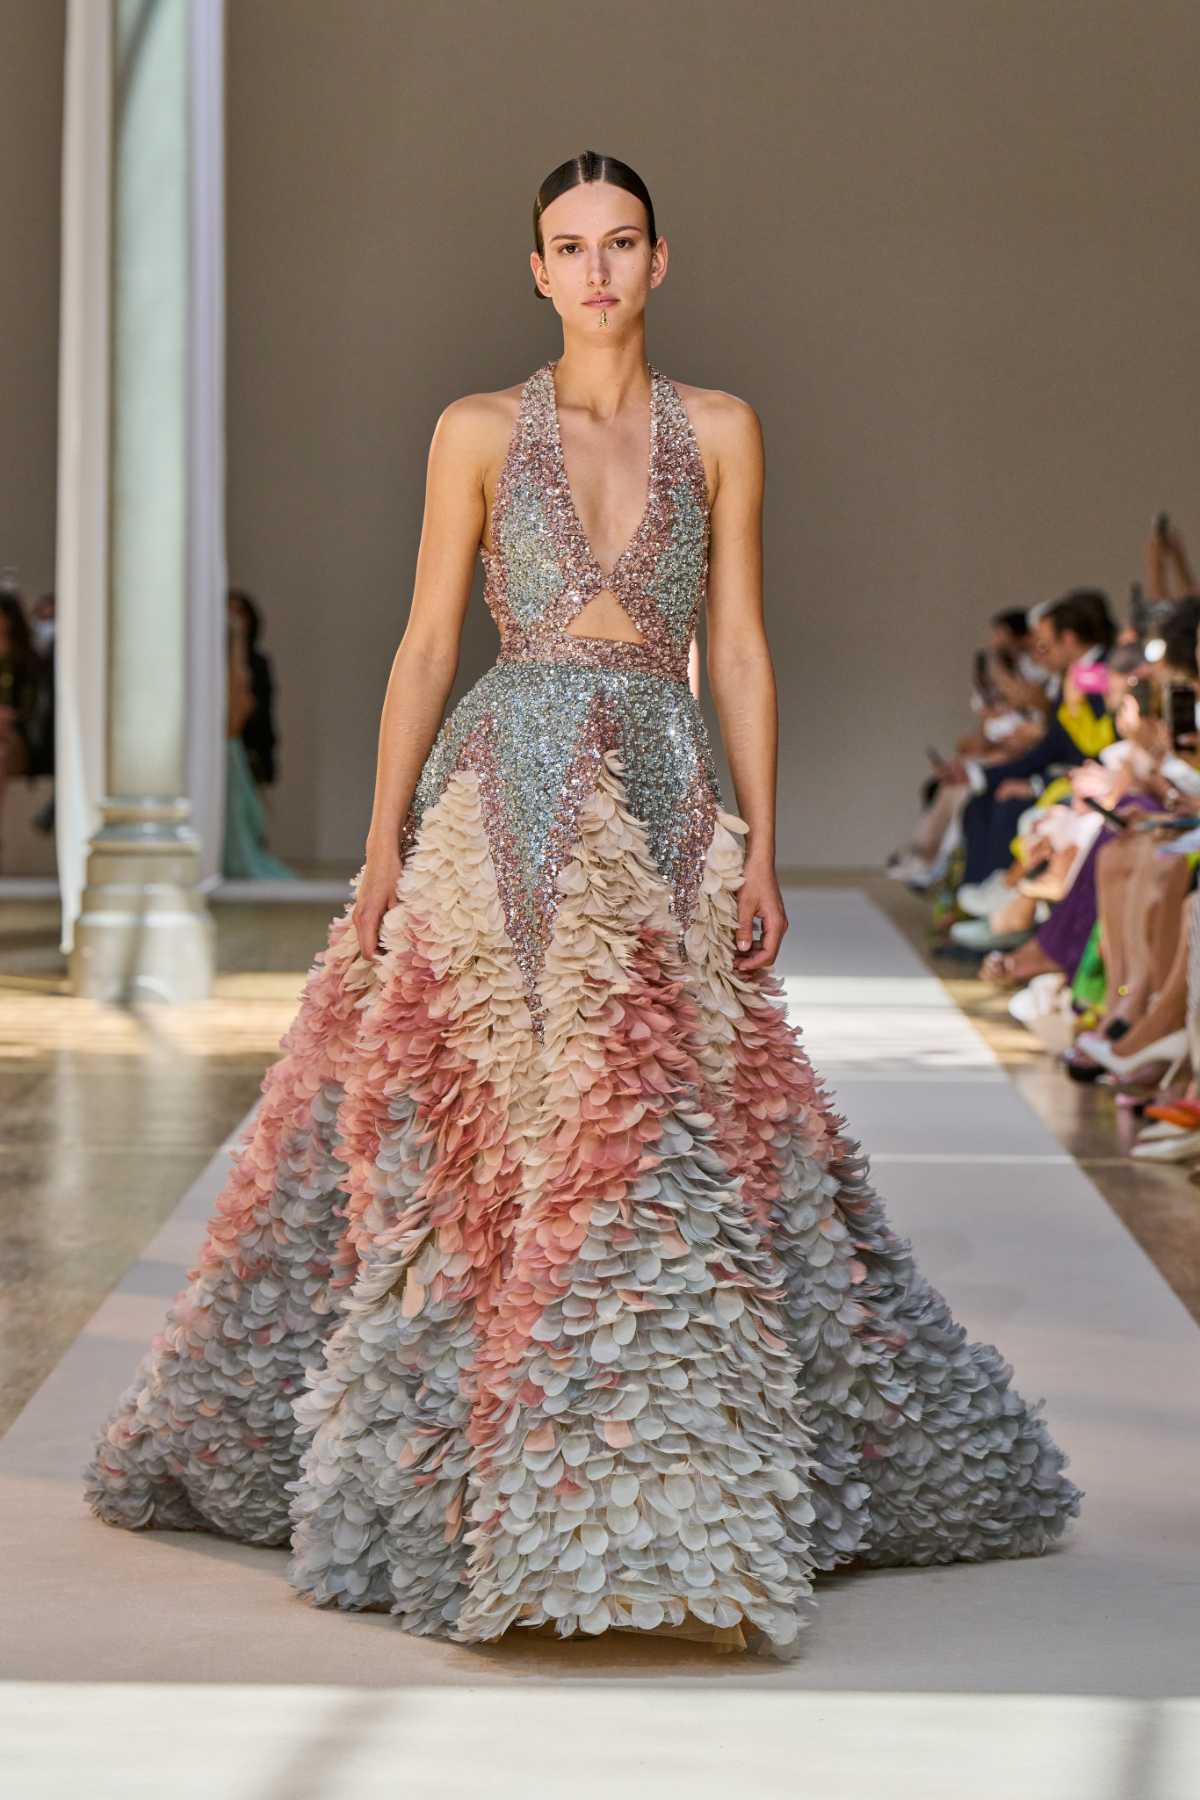 Elie Saab Presents Its New Haute Couture Fall Winter 2022-23 Collection: The Beginning Of Twilight